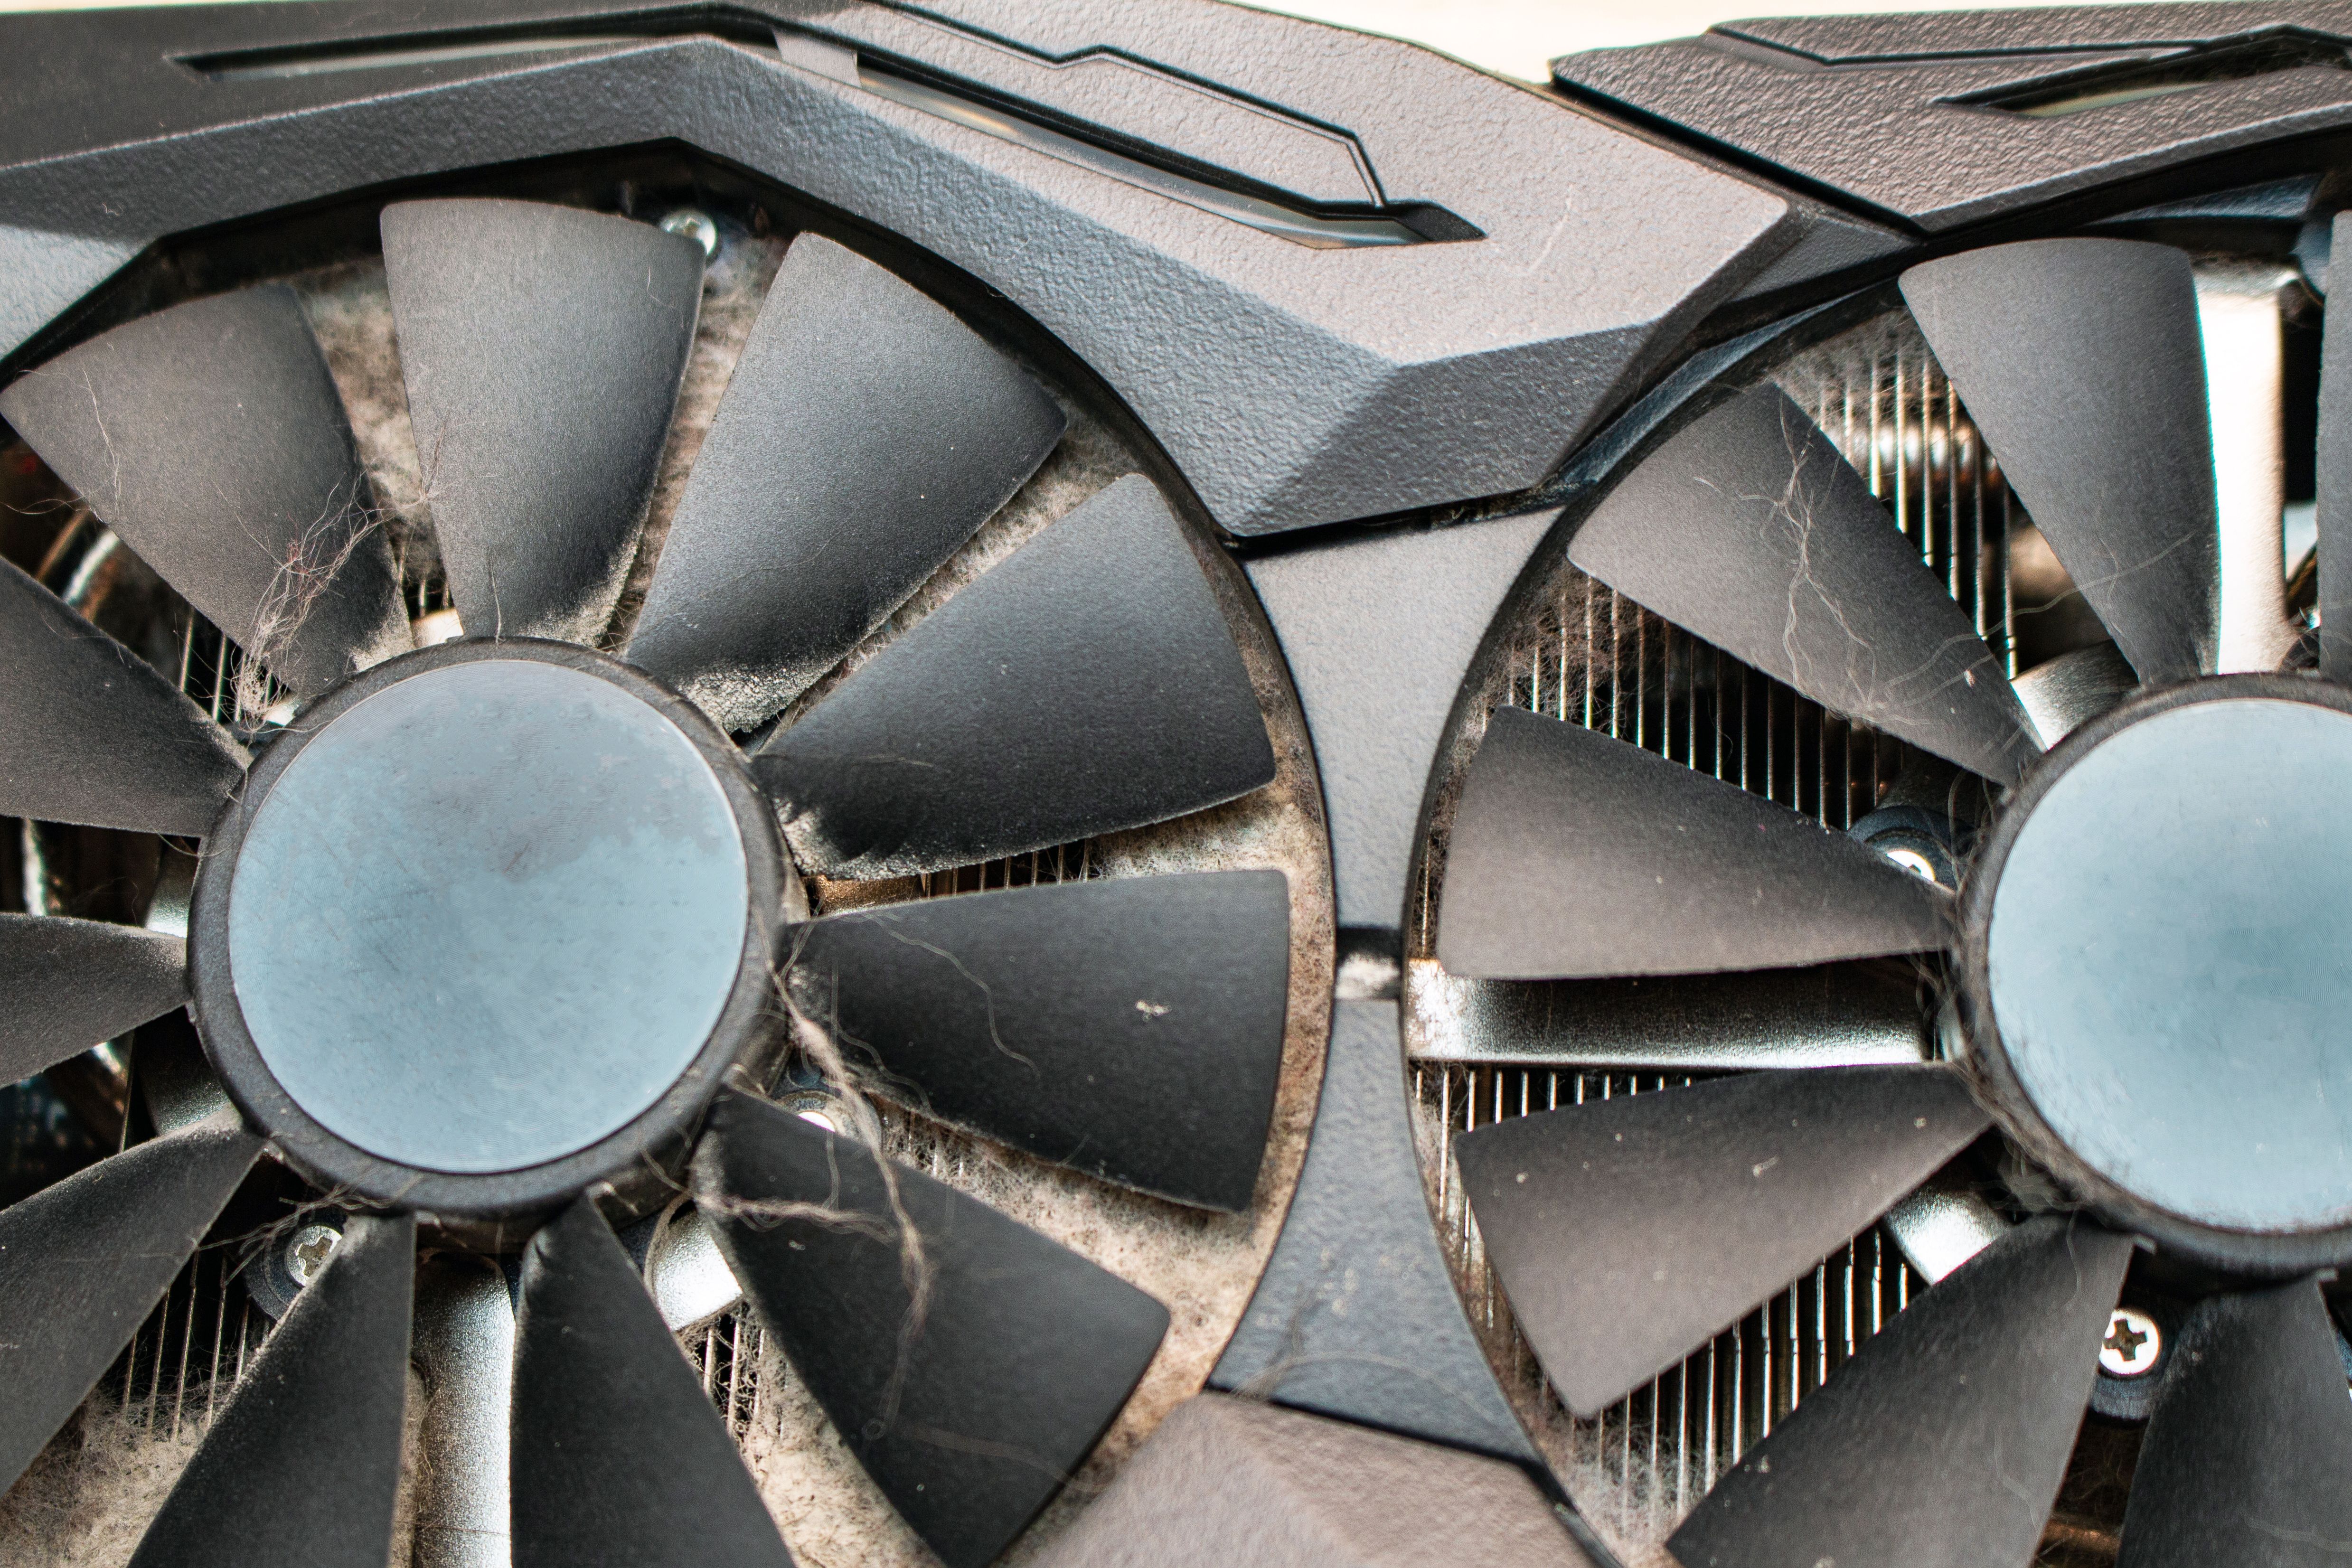 graphics card fans covered in dust